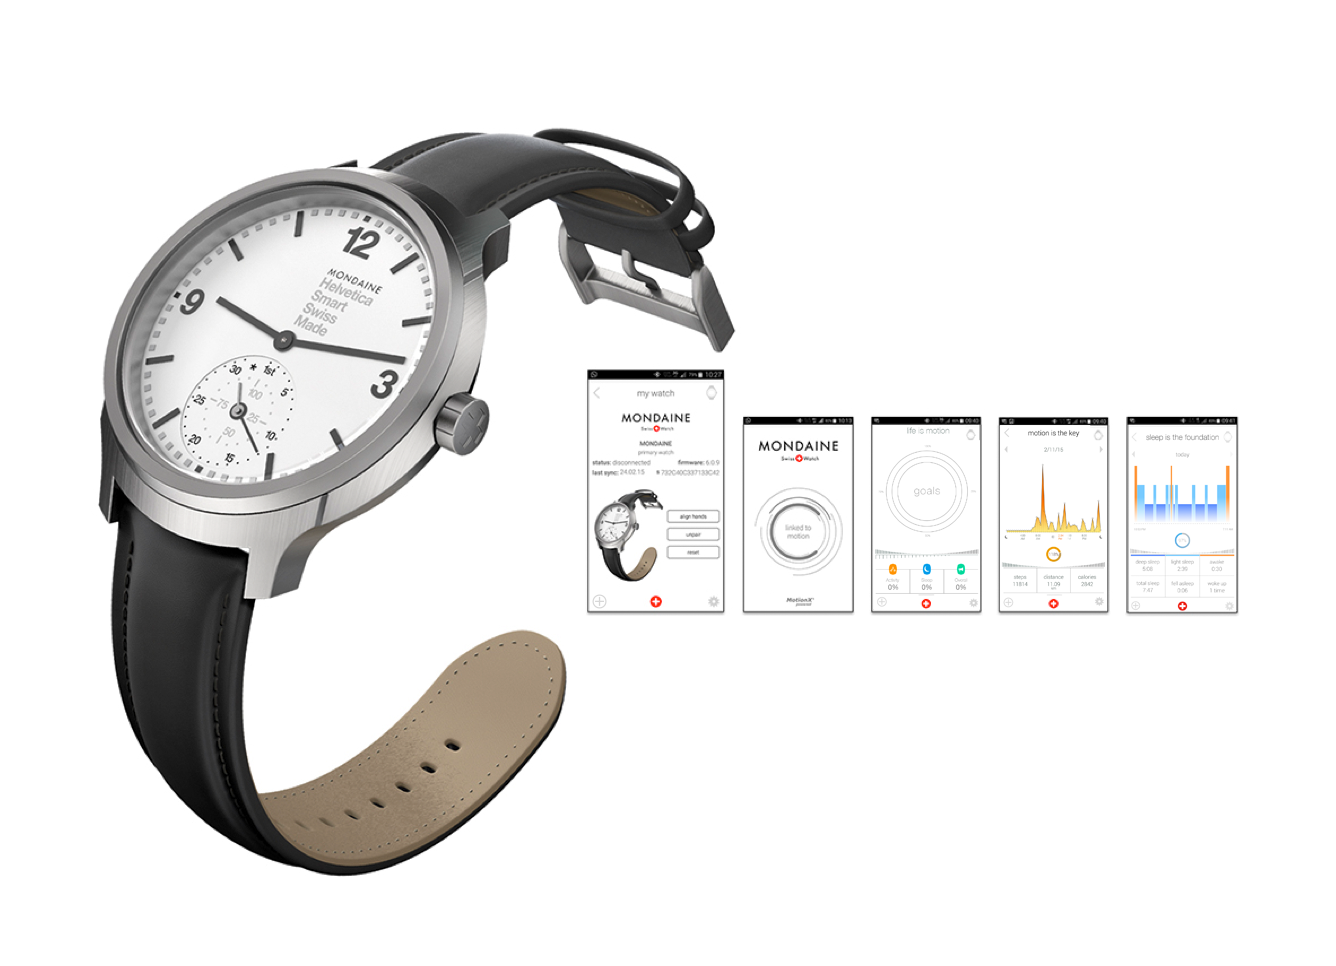 The new Mondaine Helvetica No 1 Smart watch with branded app function options